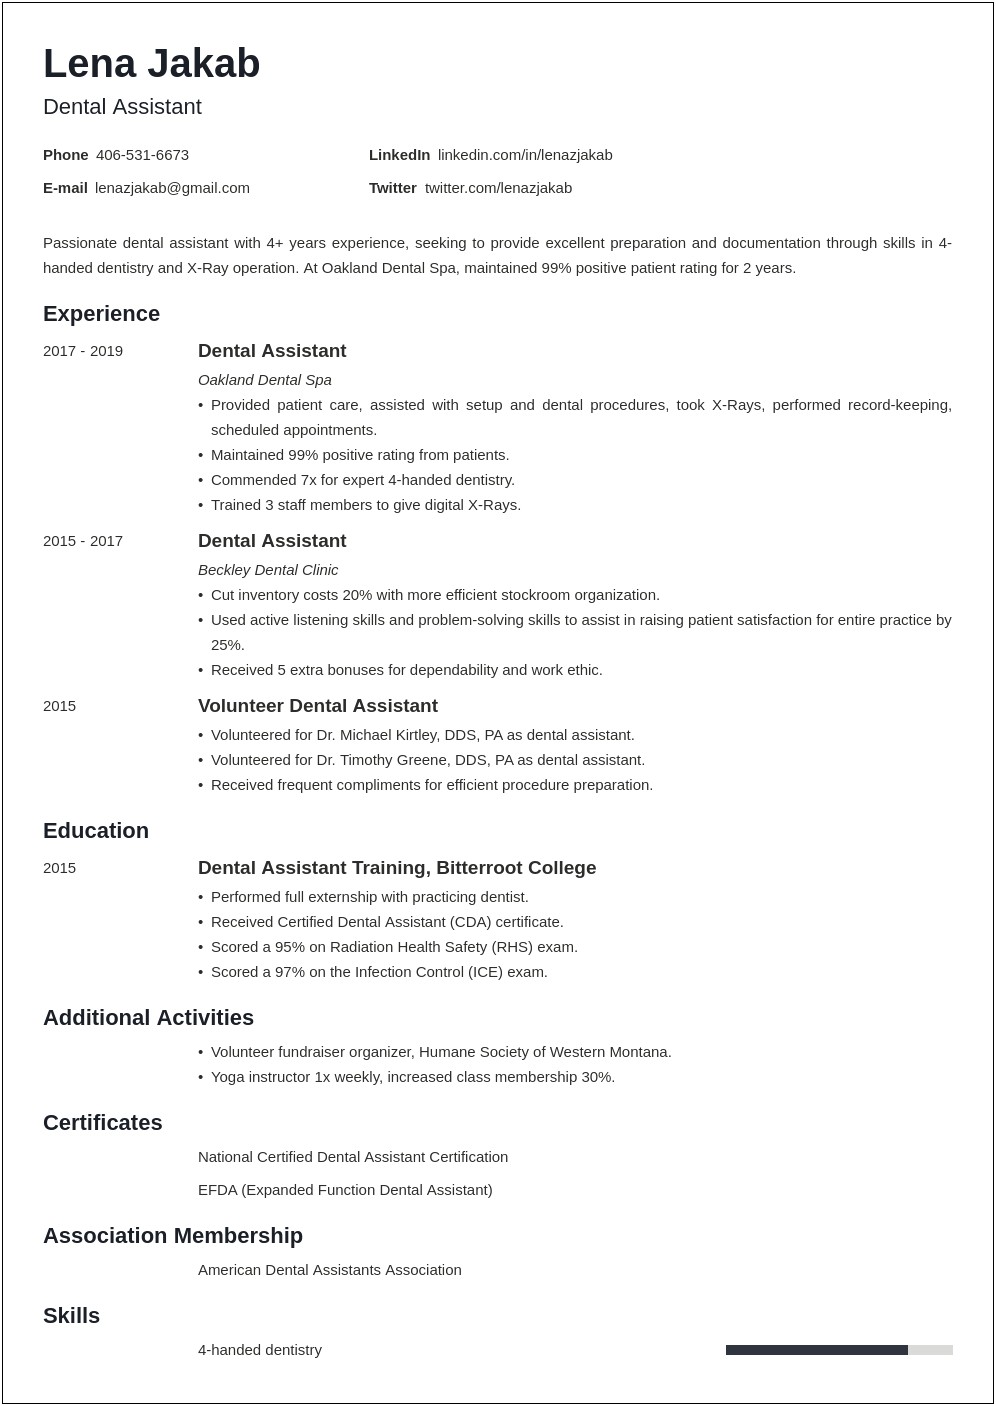 Dental Assisting Resume Template For Ms Word